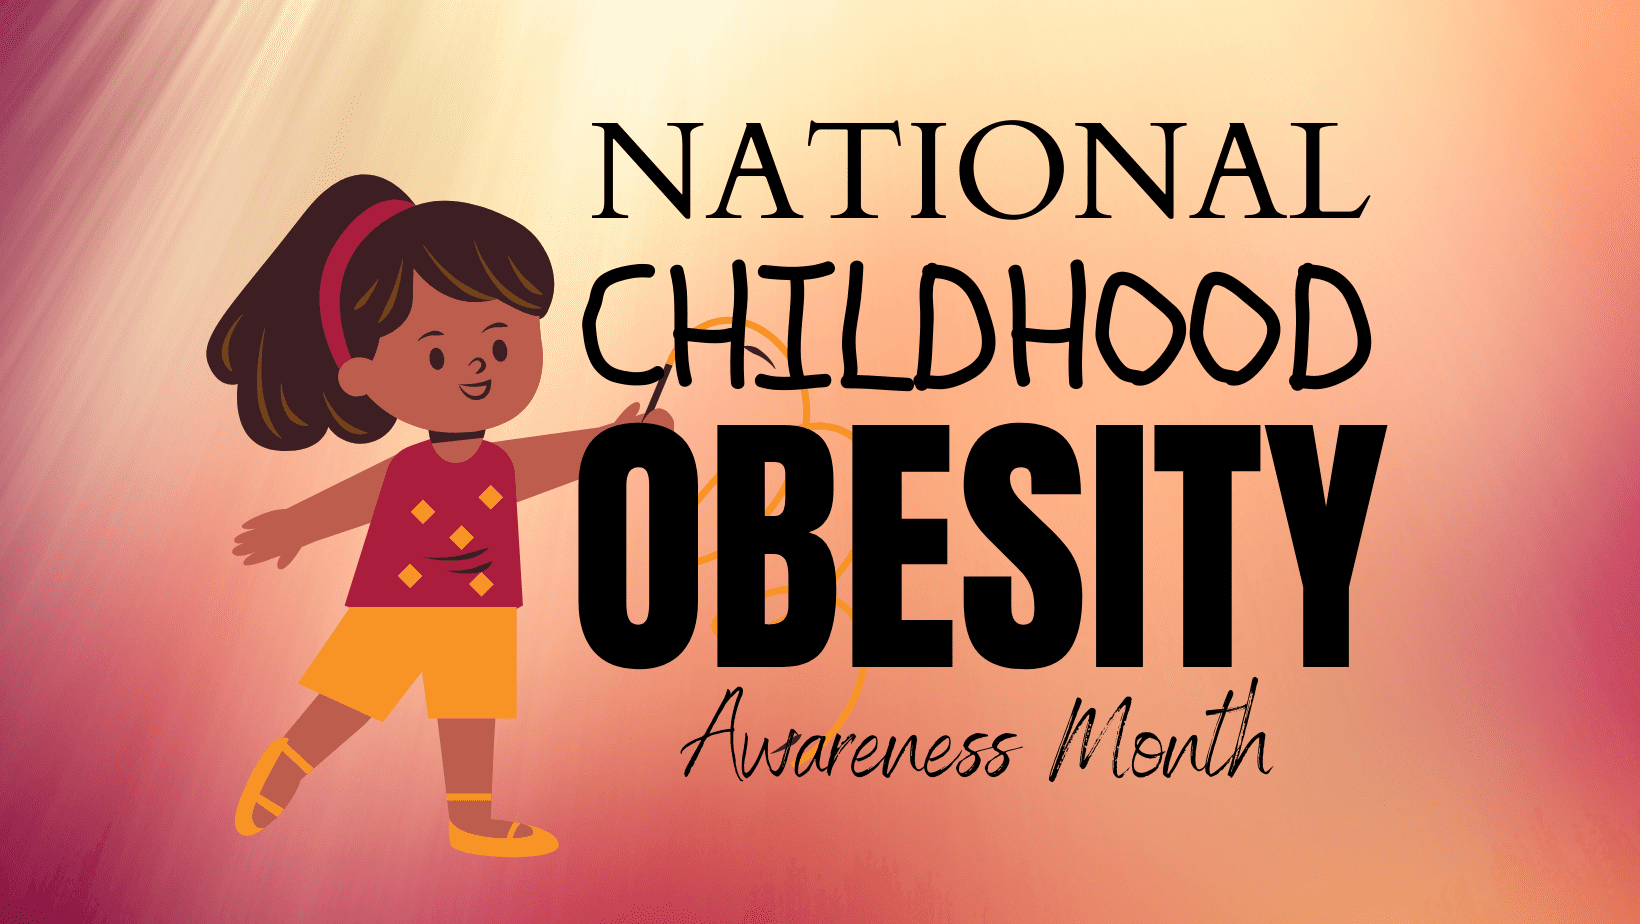 National Child Obesity Awareness Month How to Improve, Manage Your